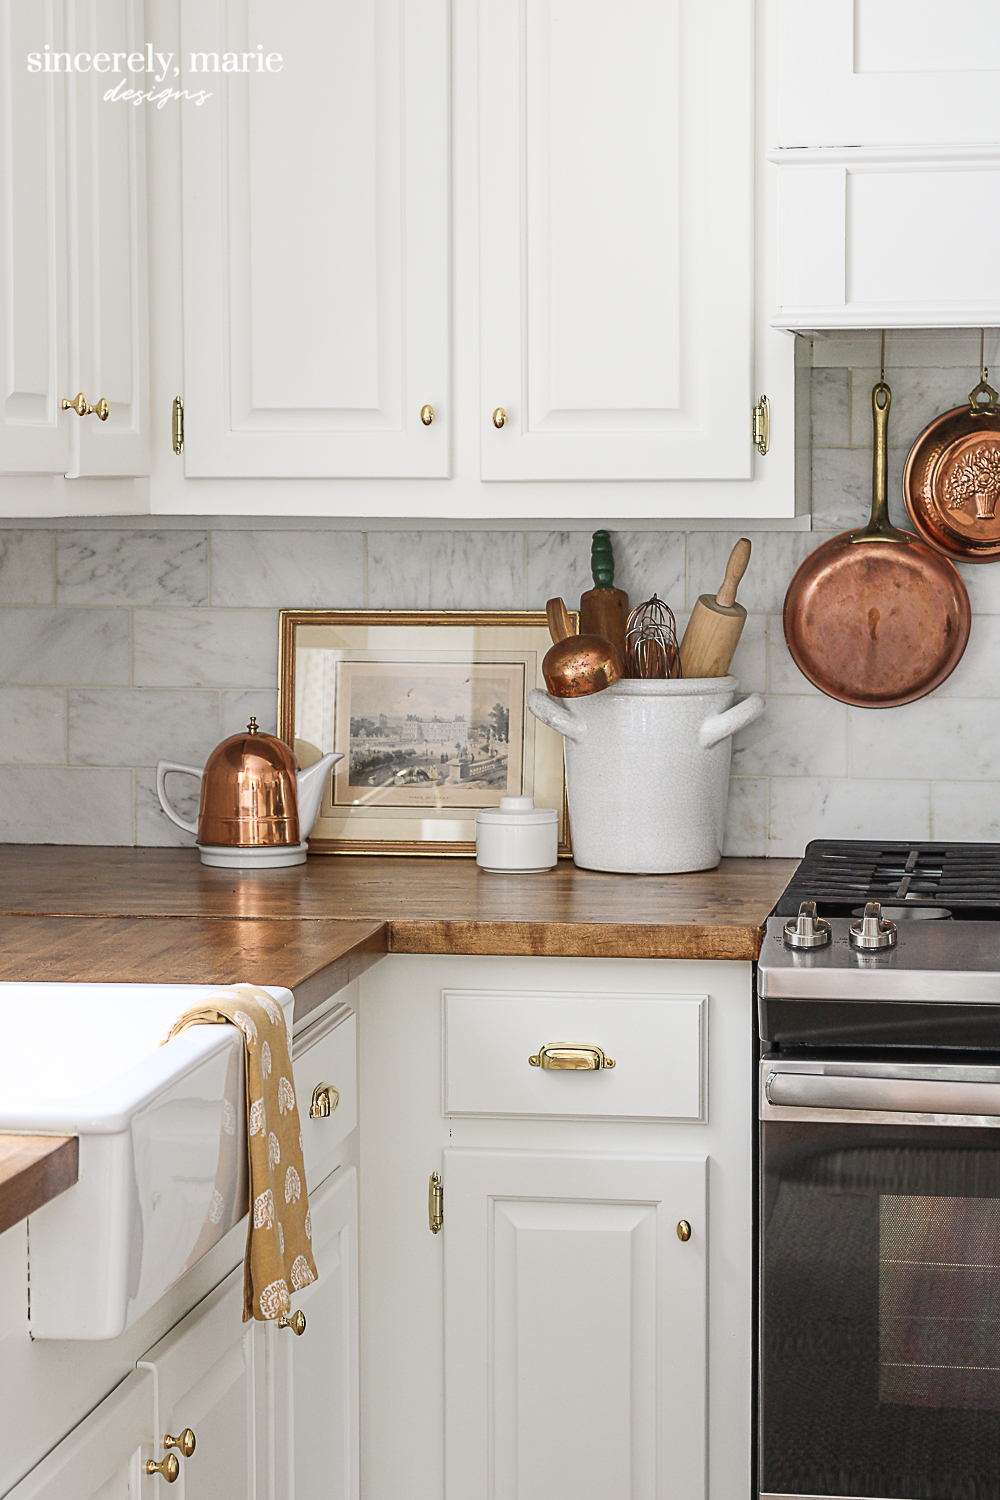 Our Lived In Kitchen Refresh - Sincerely, Marie Designs